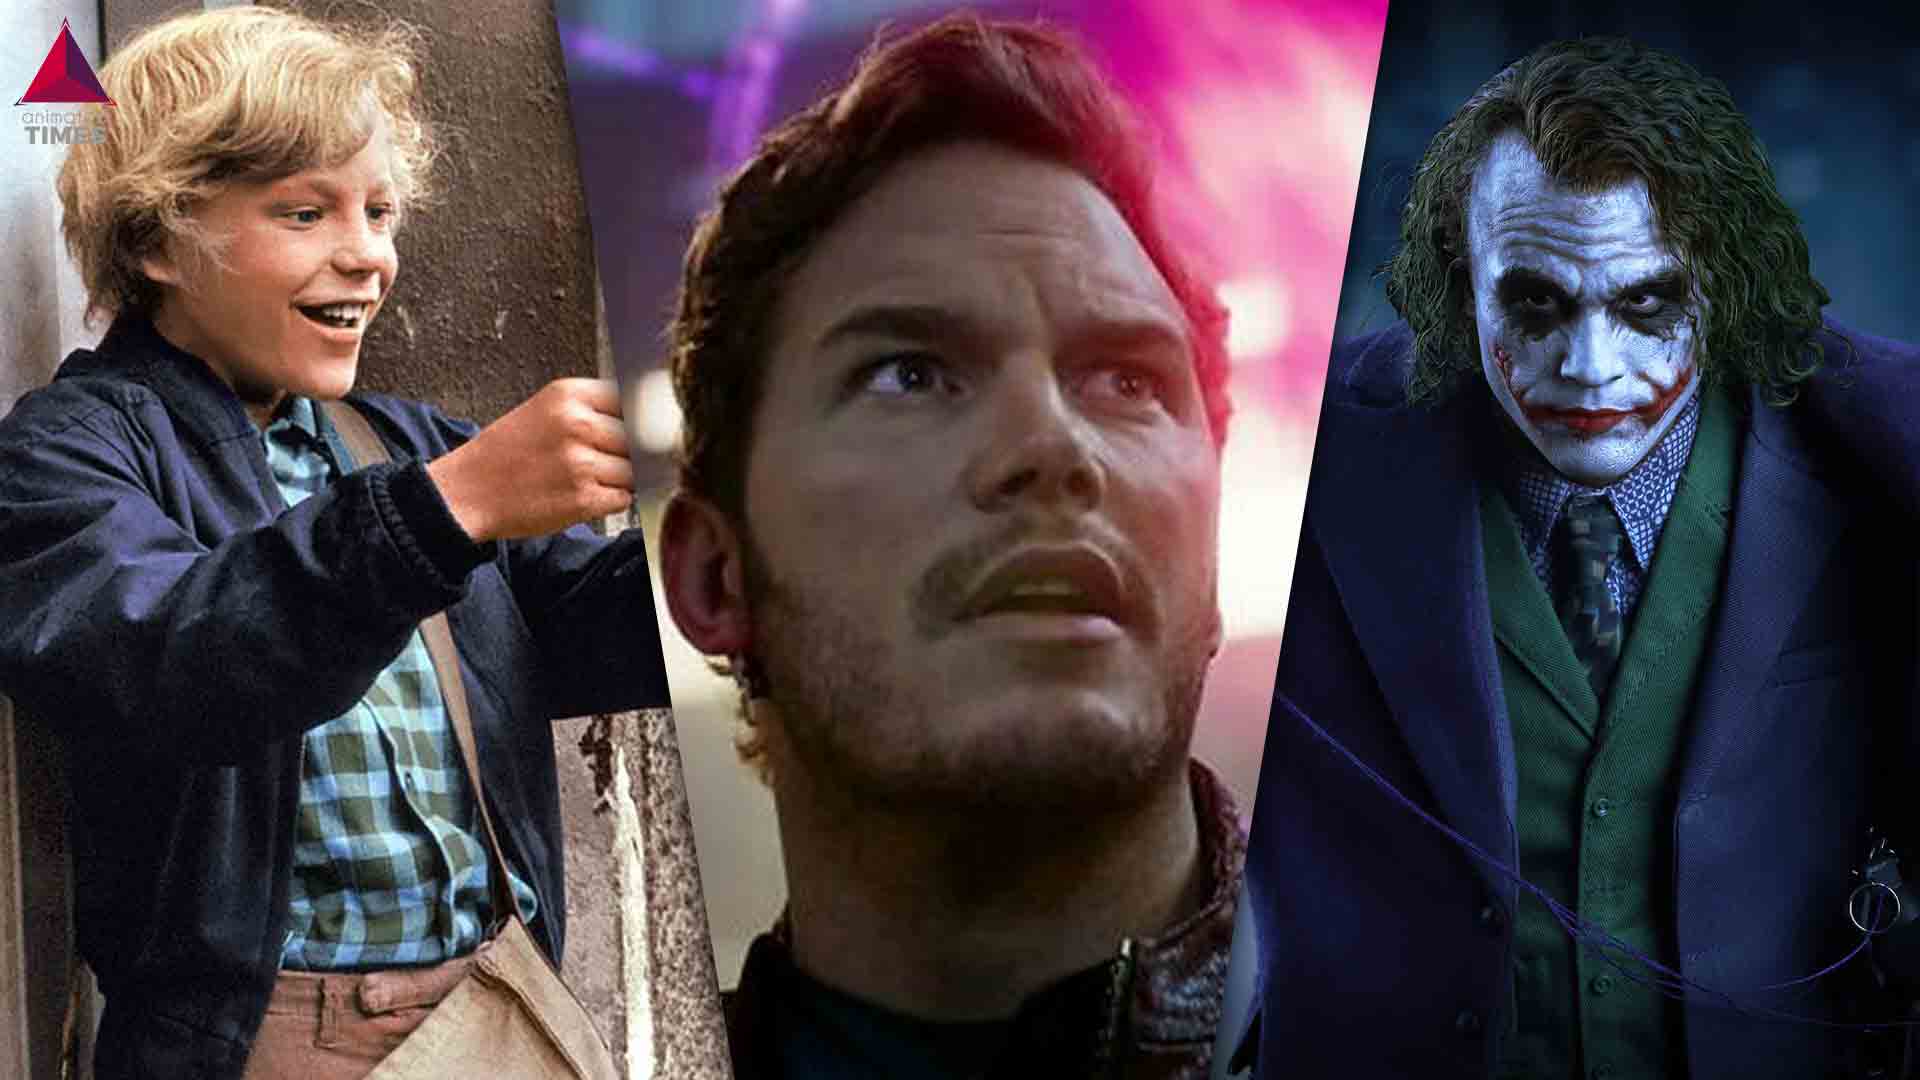 10 Best Movie Fan Theories And Speculations From An Online Group